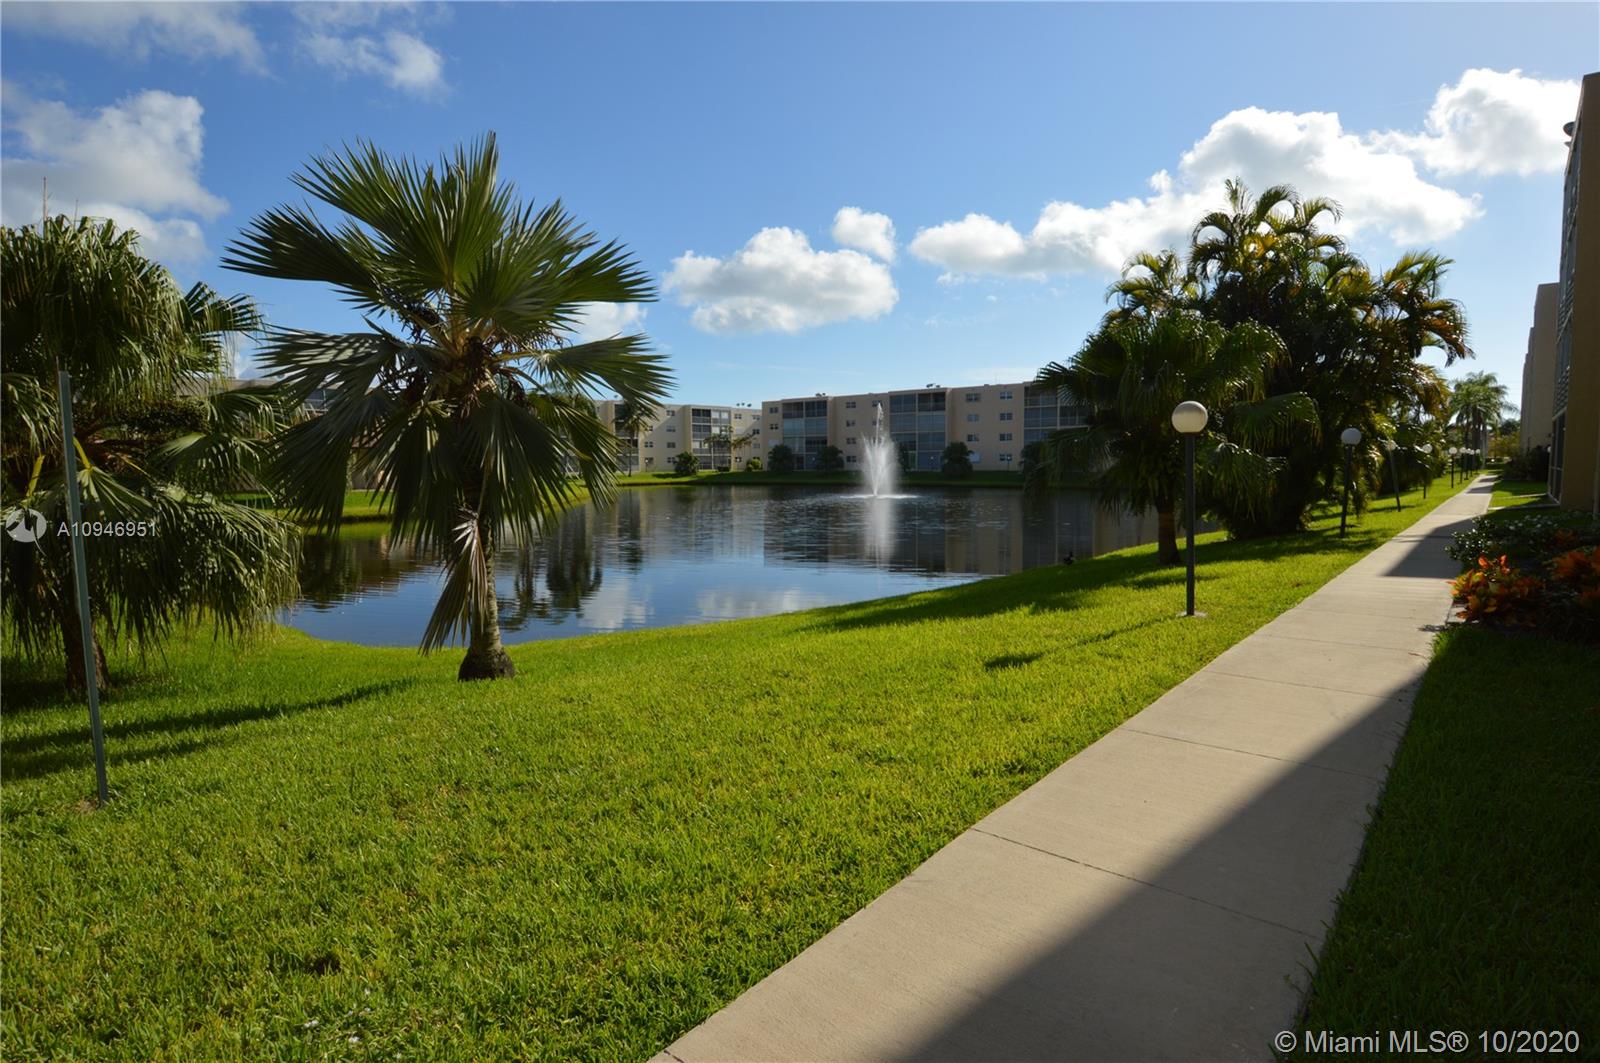 Beautifully maintained lake with walkway around the entire lake for your walks